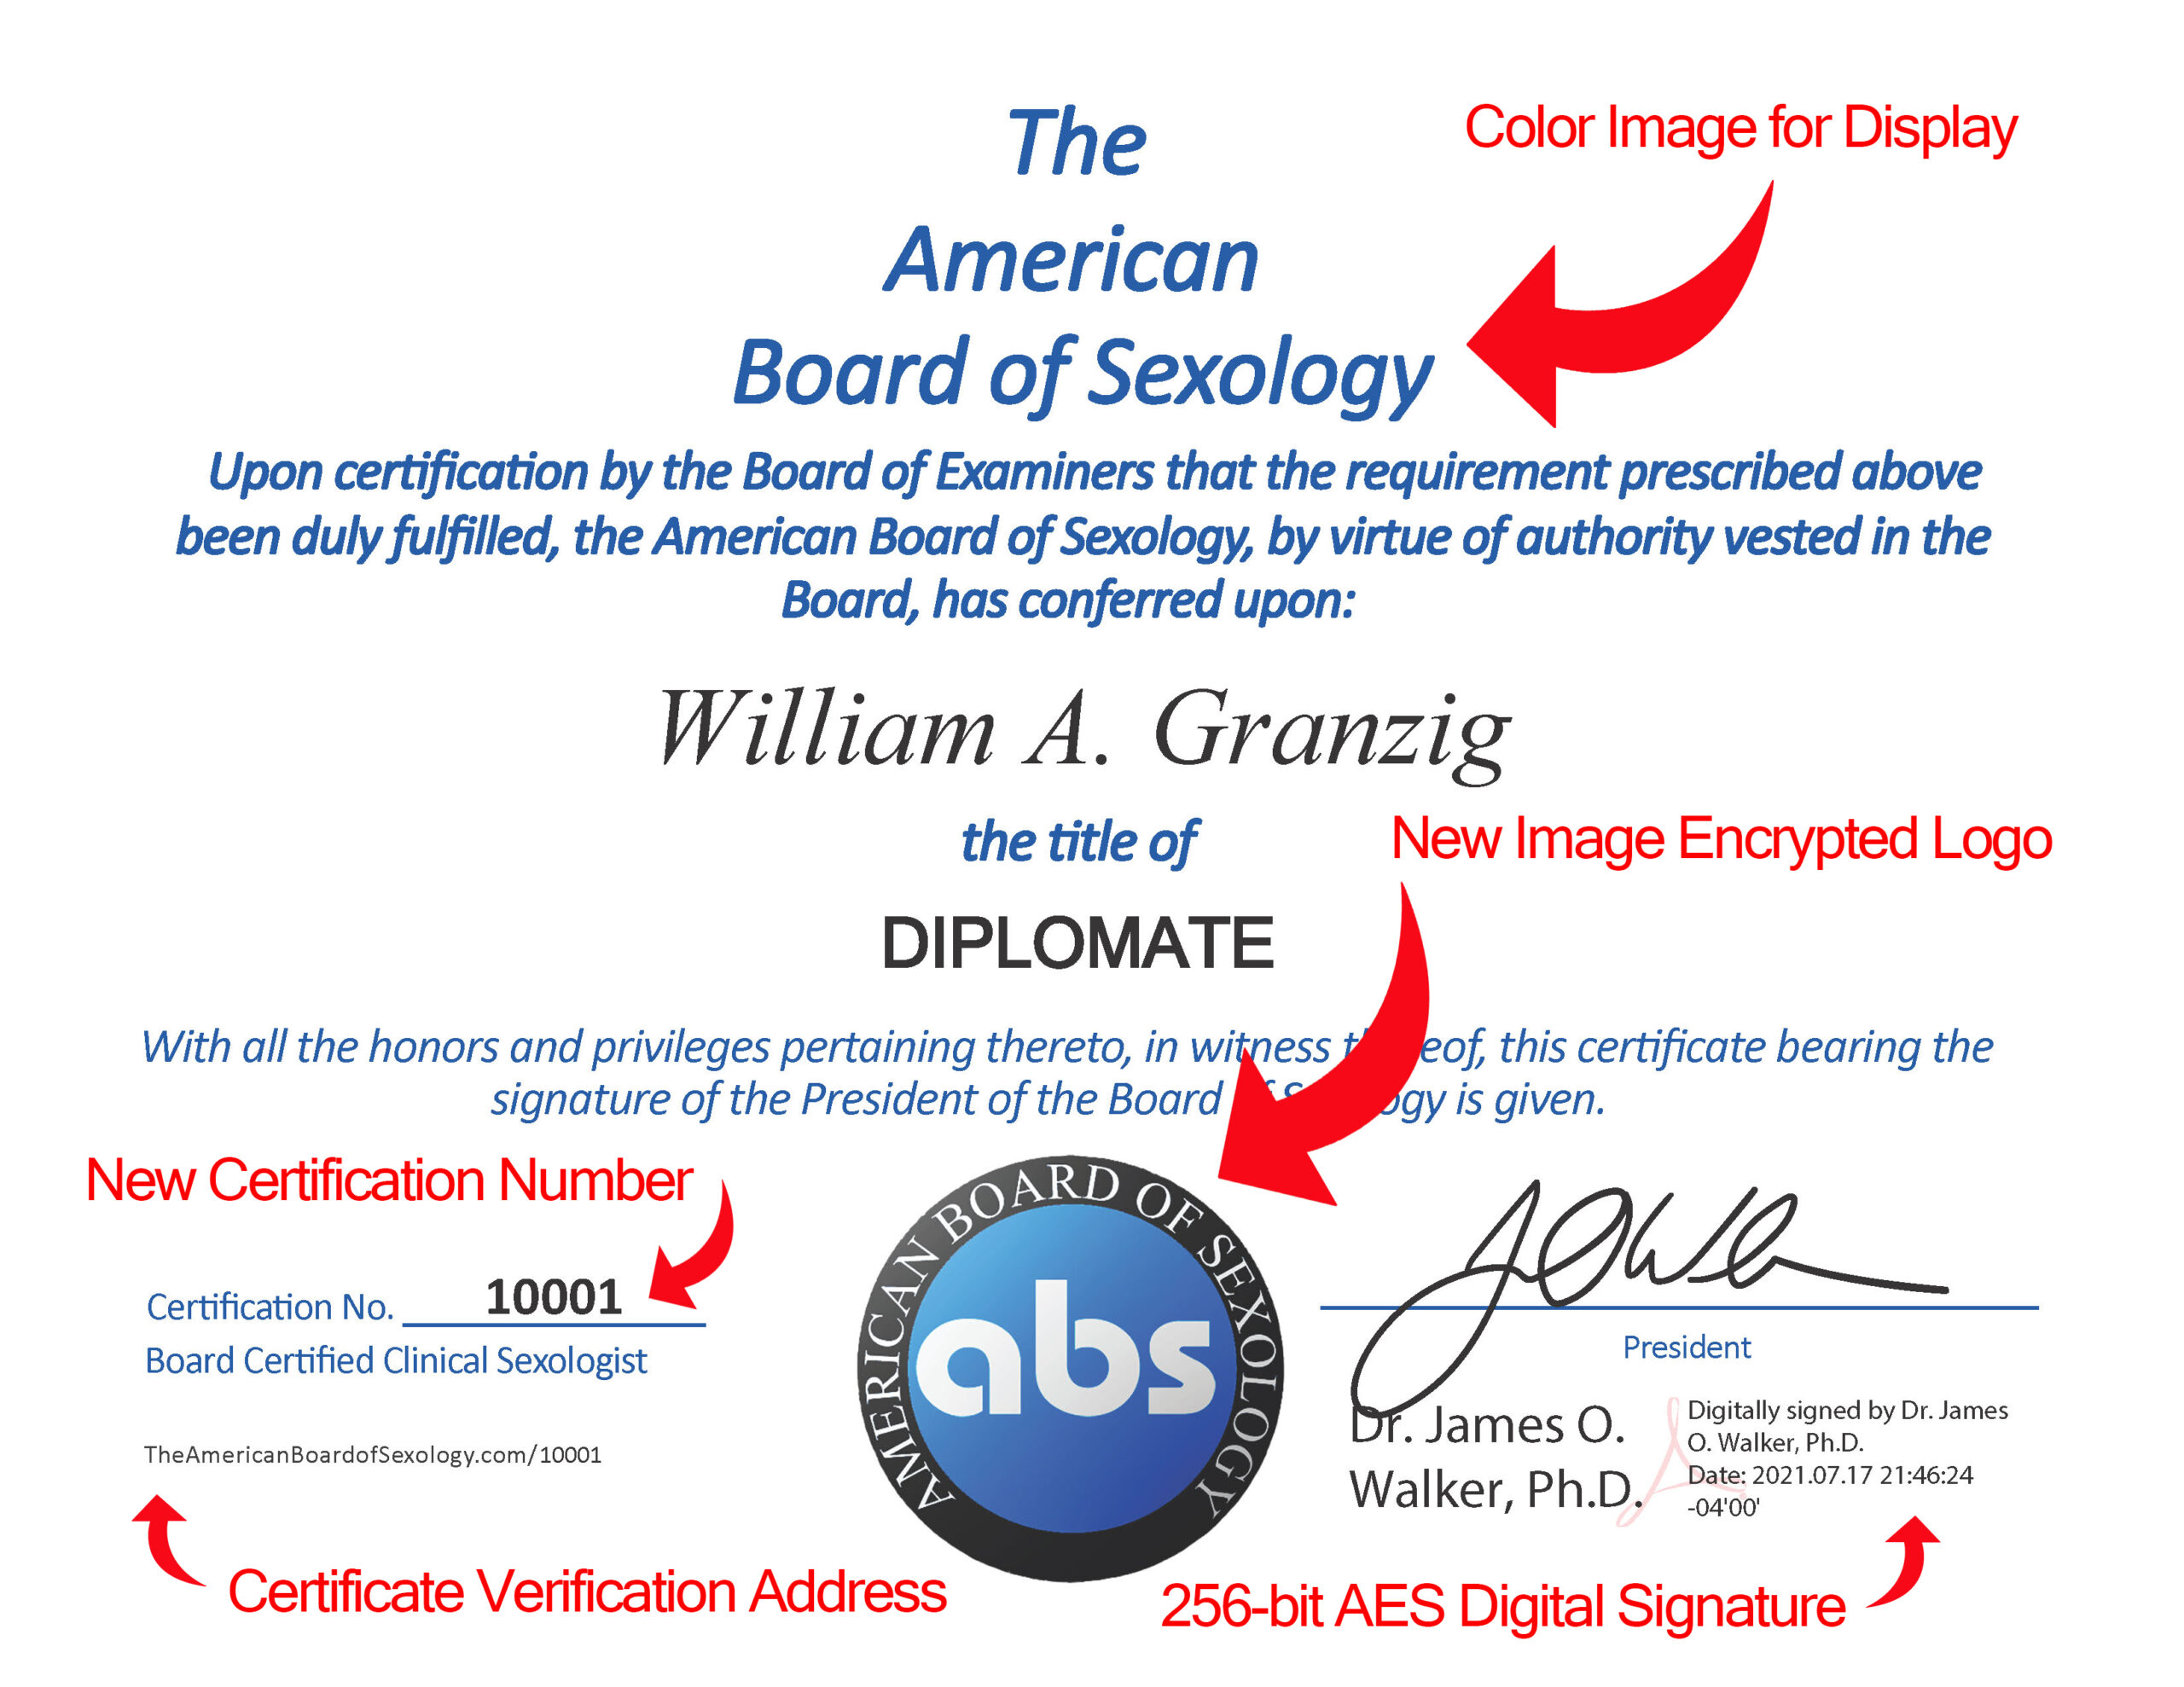 The NEW American Board of Sexology Diplomate Certificate explained